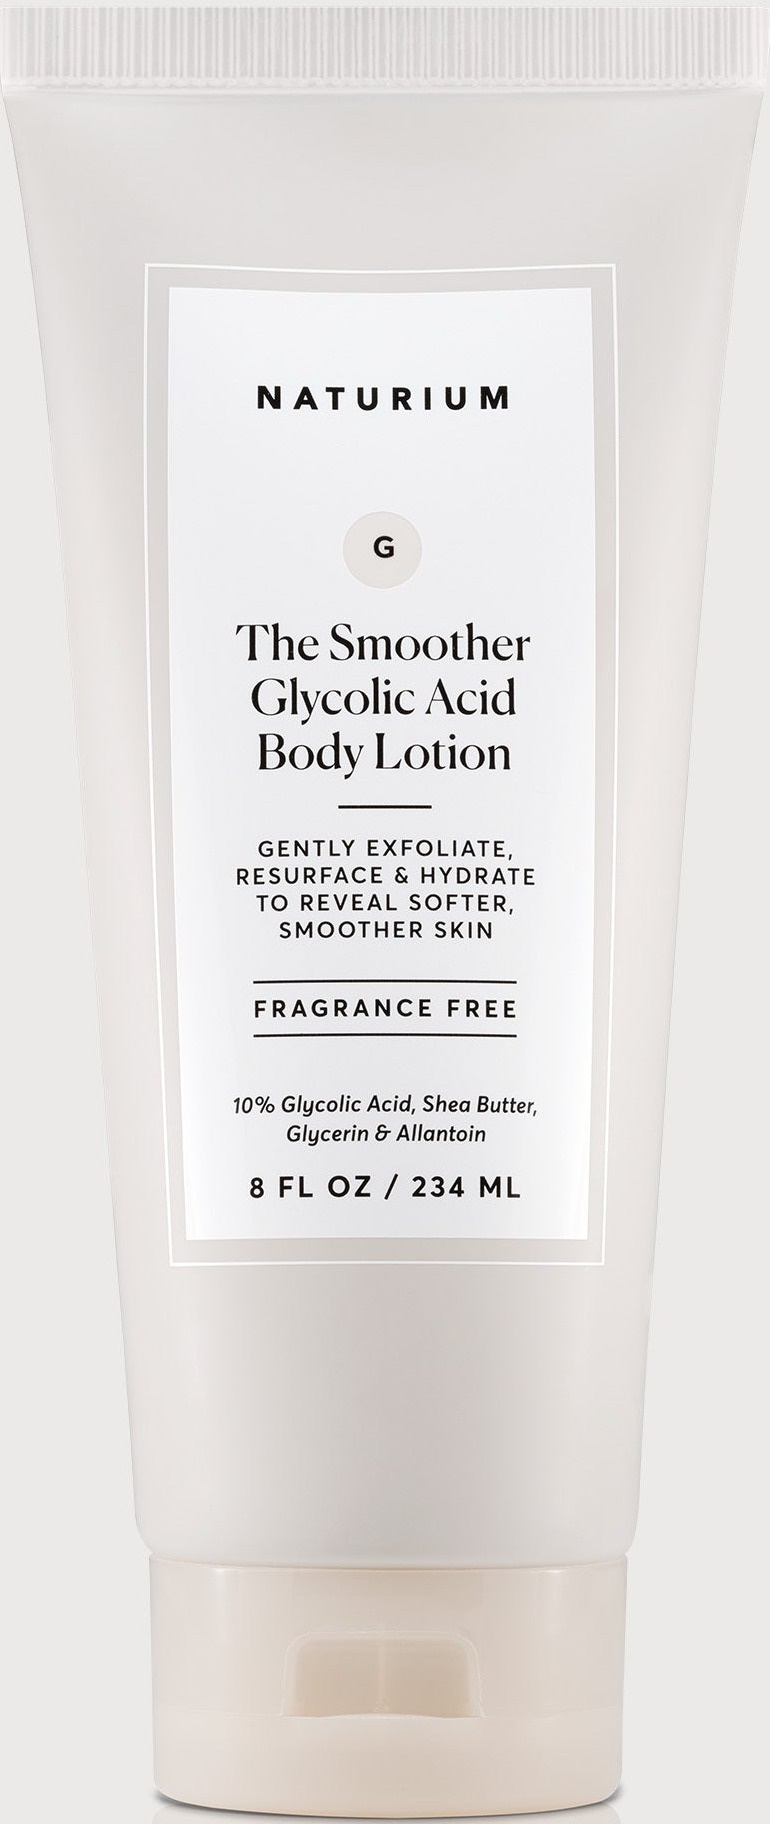 naturium The Smoother Glycolic Acid Body Lotion